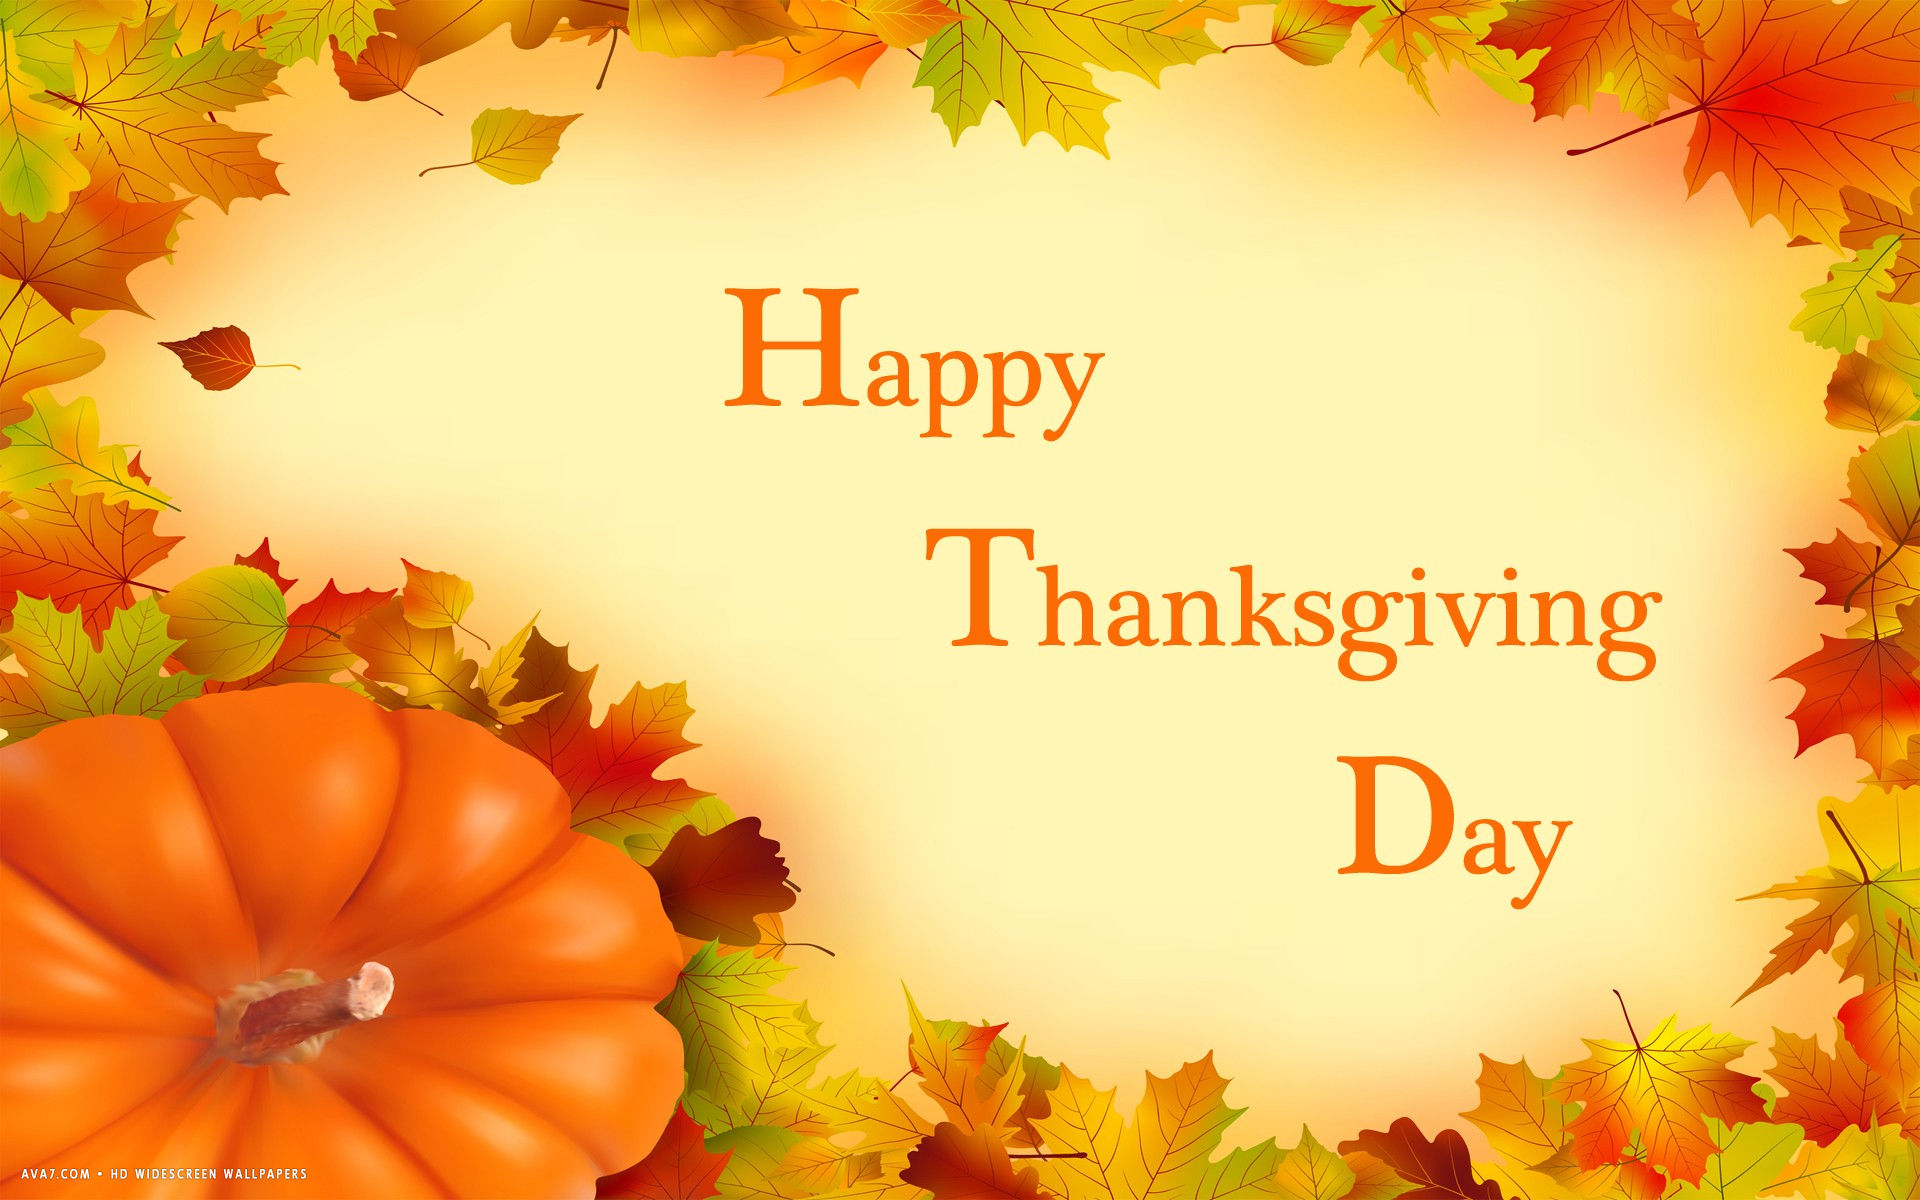 Happy Thanksgiving Day Wishes Pumpkin Yellow Red Leaves Holiday HD